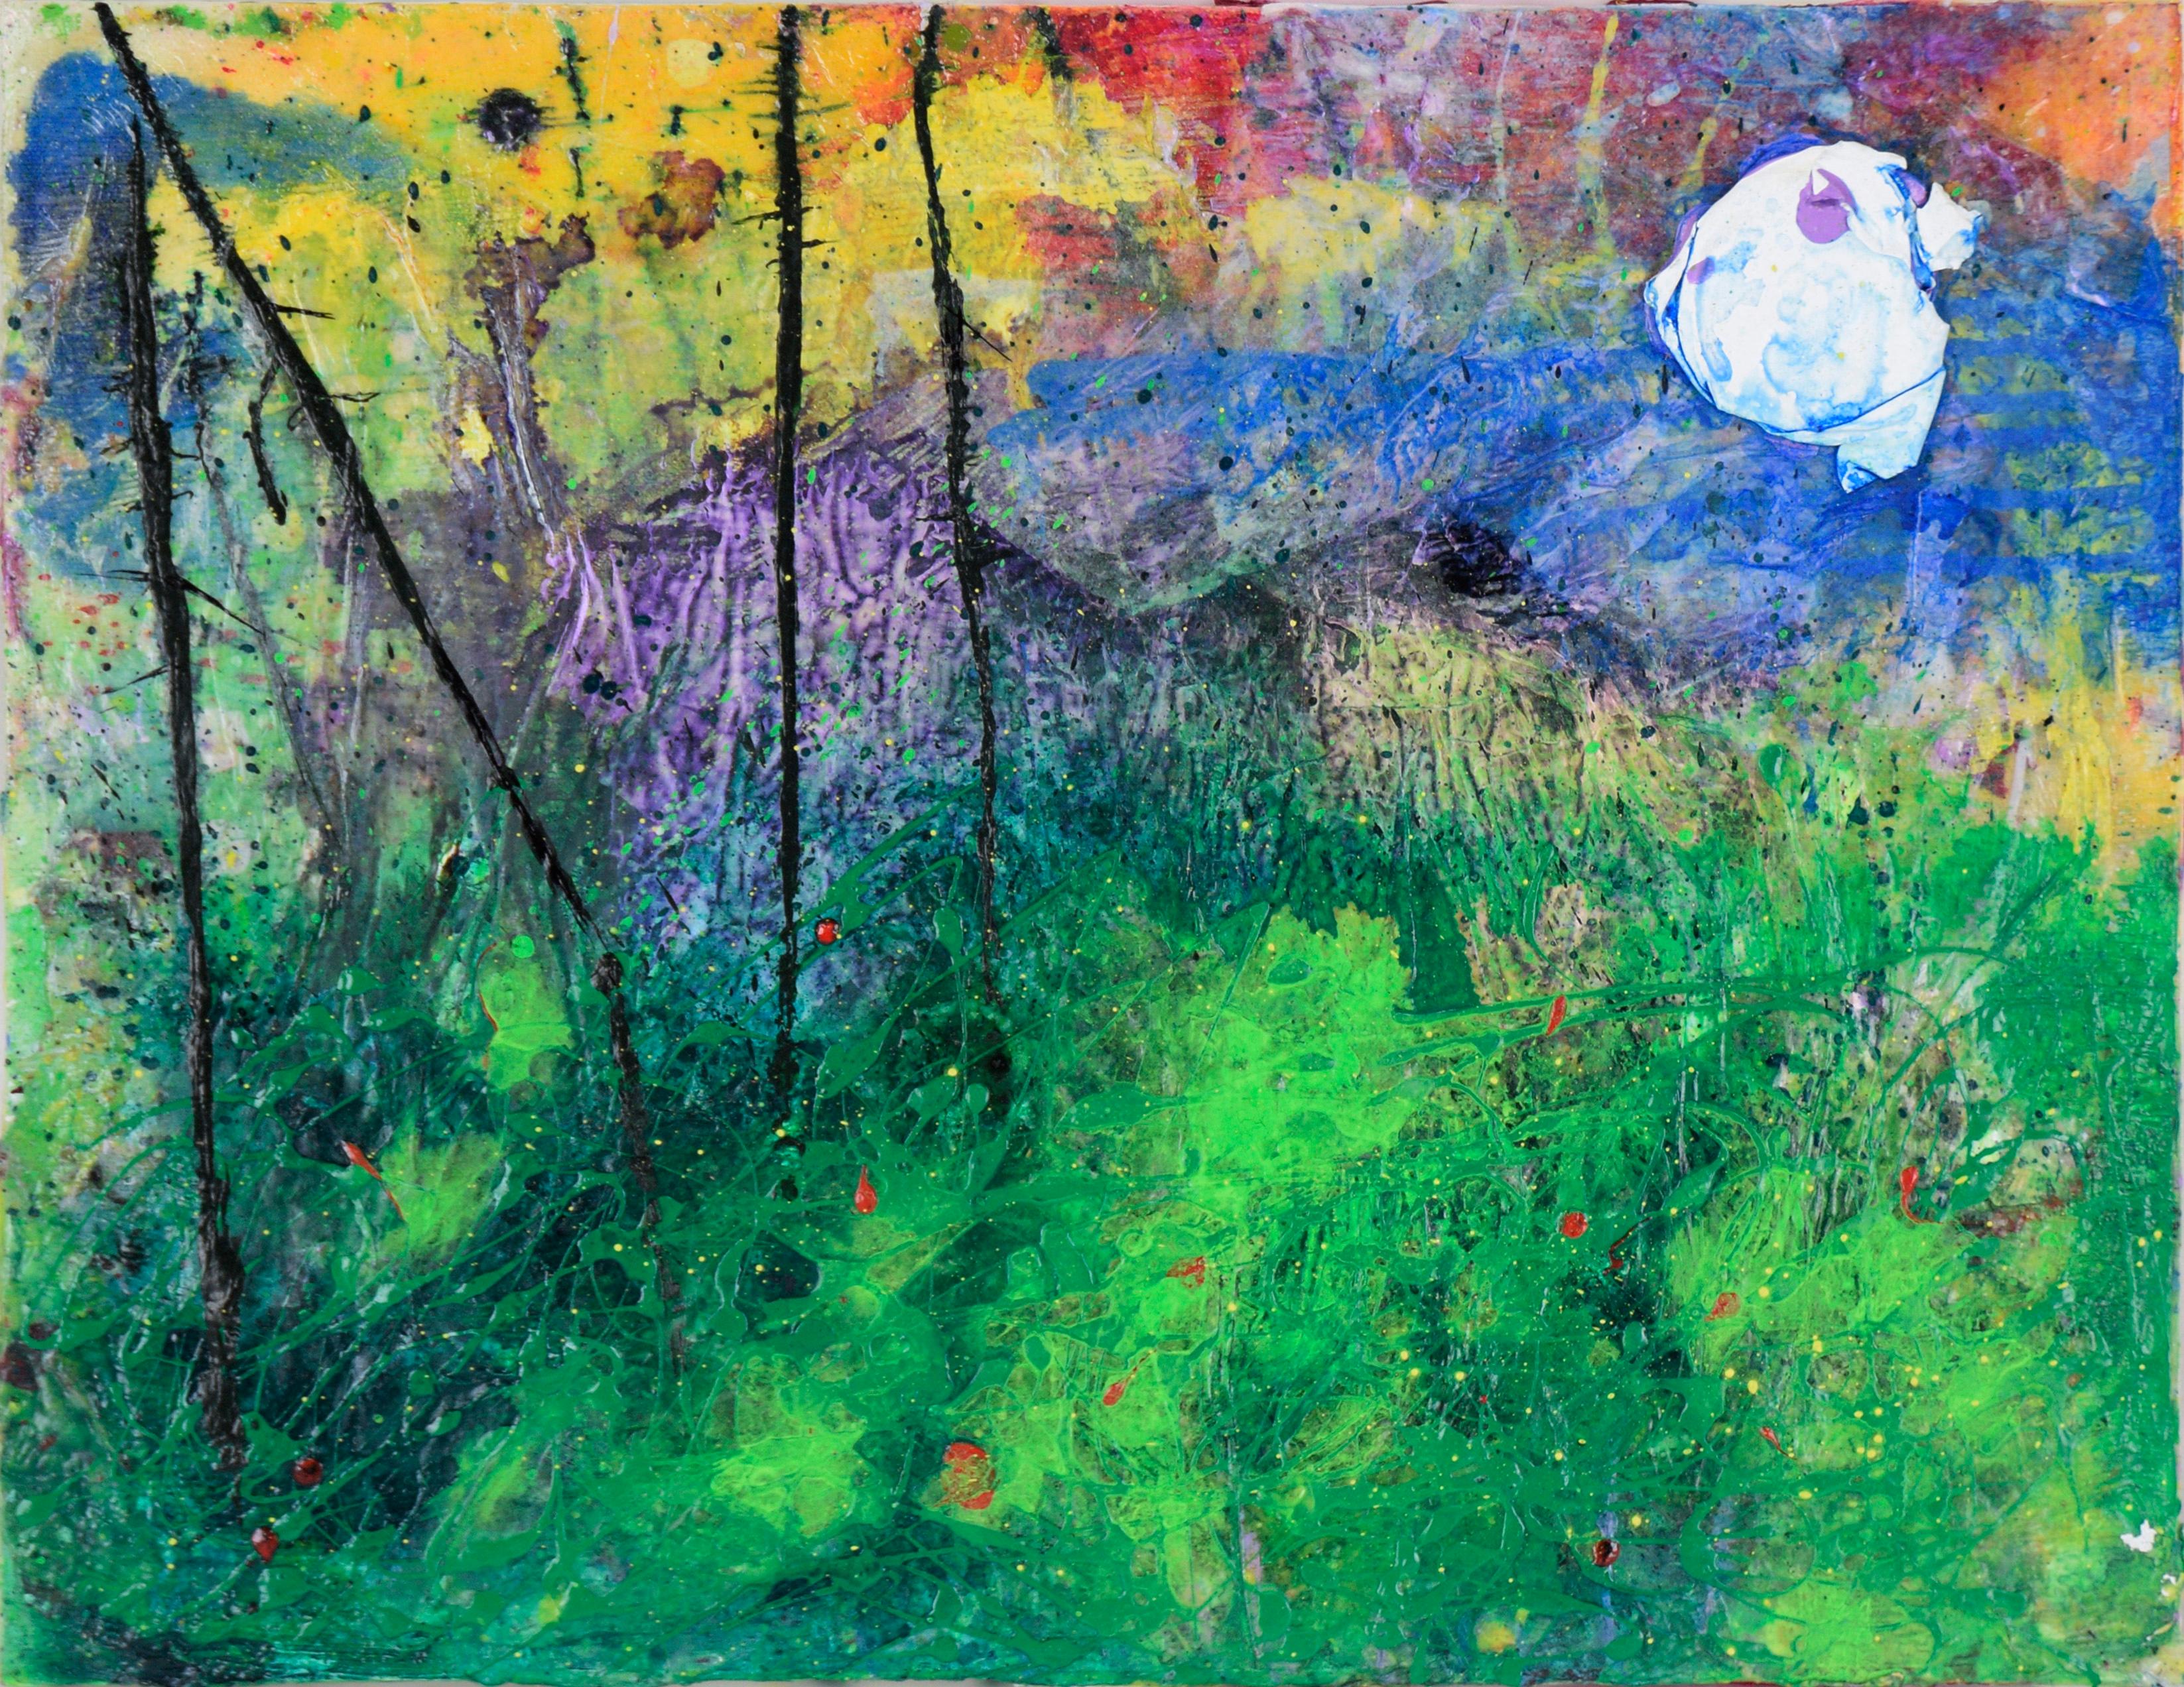 Moonrise Over the Mountains -Abstracted Landscape in Acrylic on Canvas